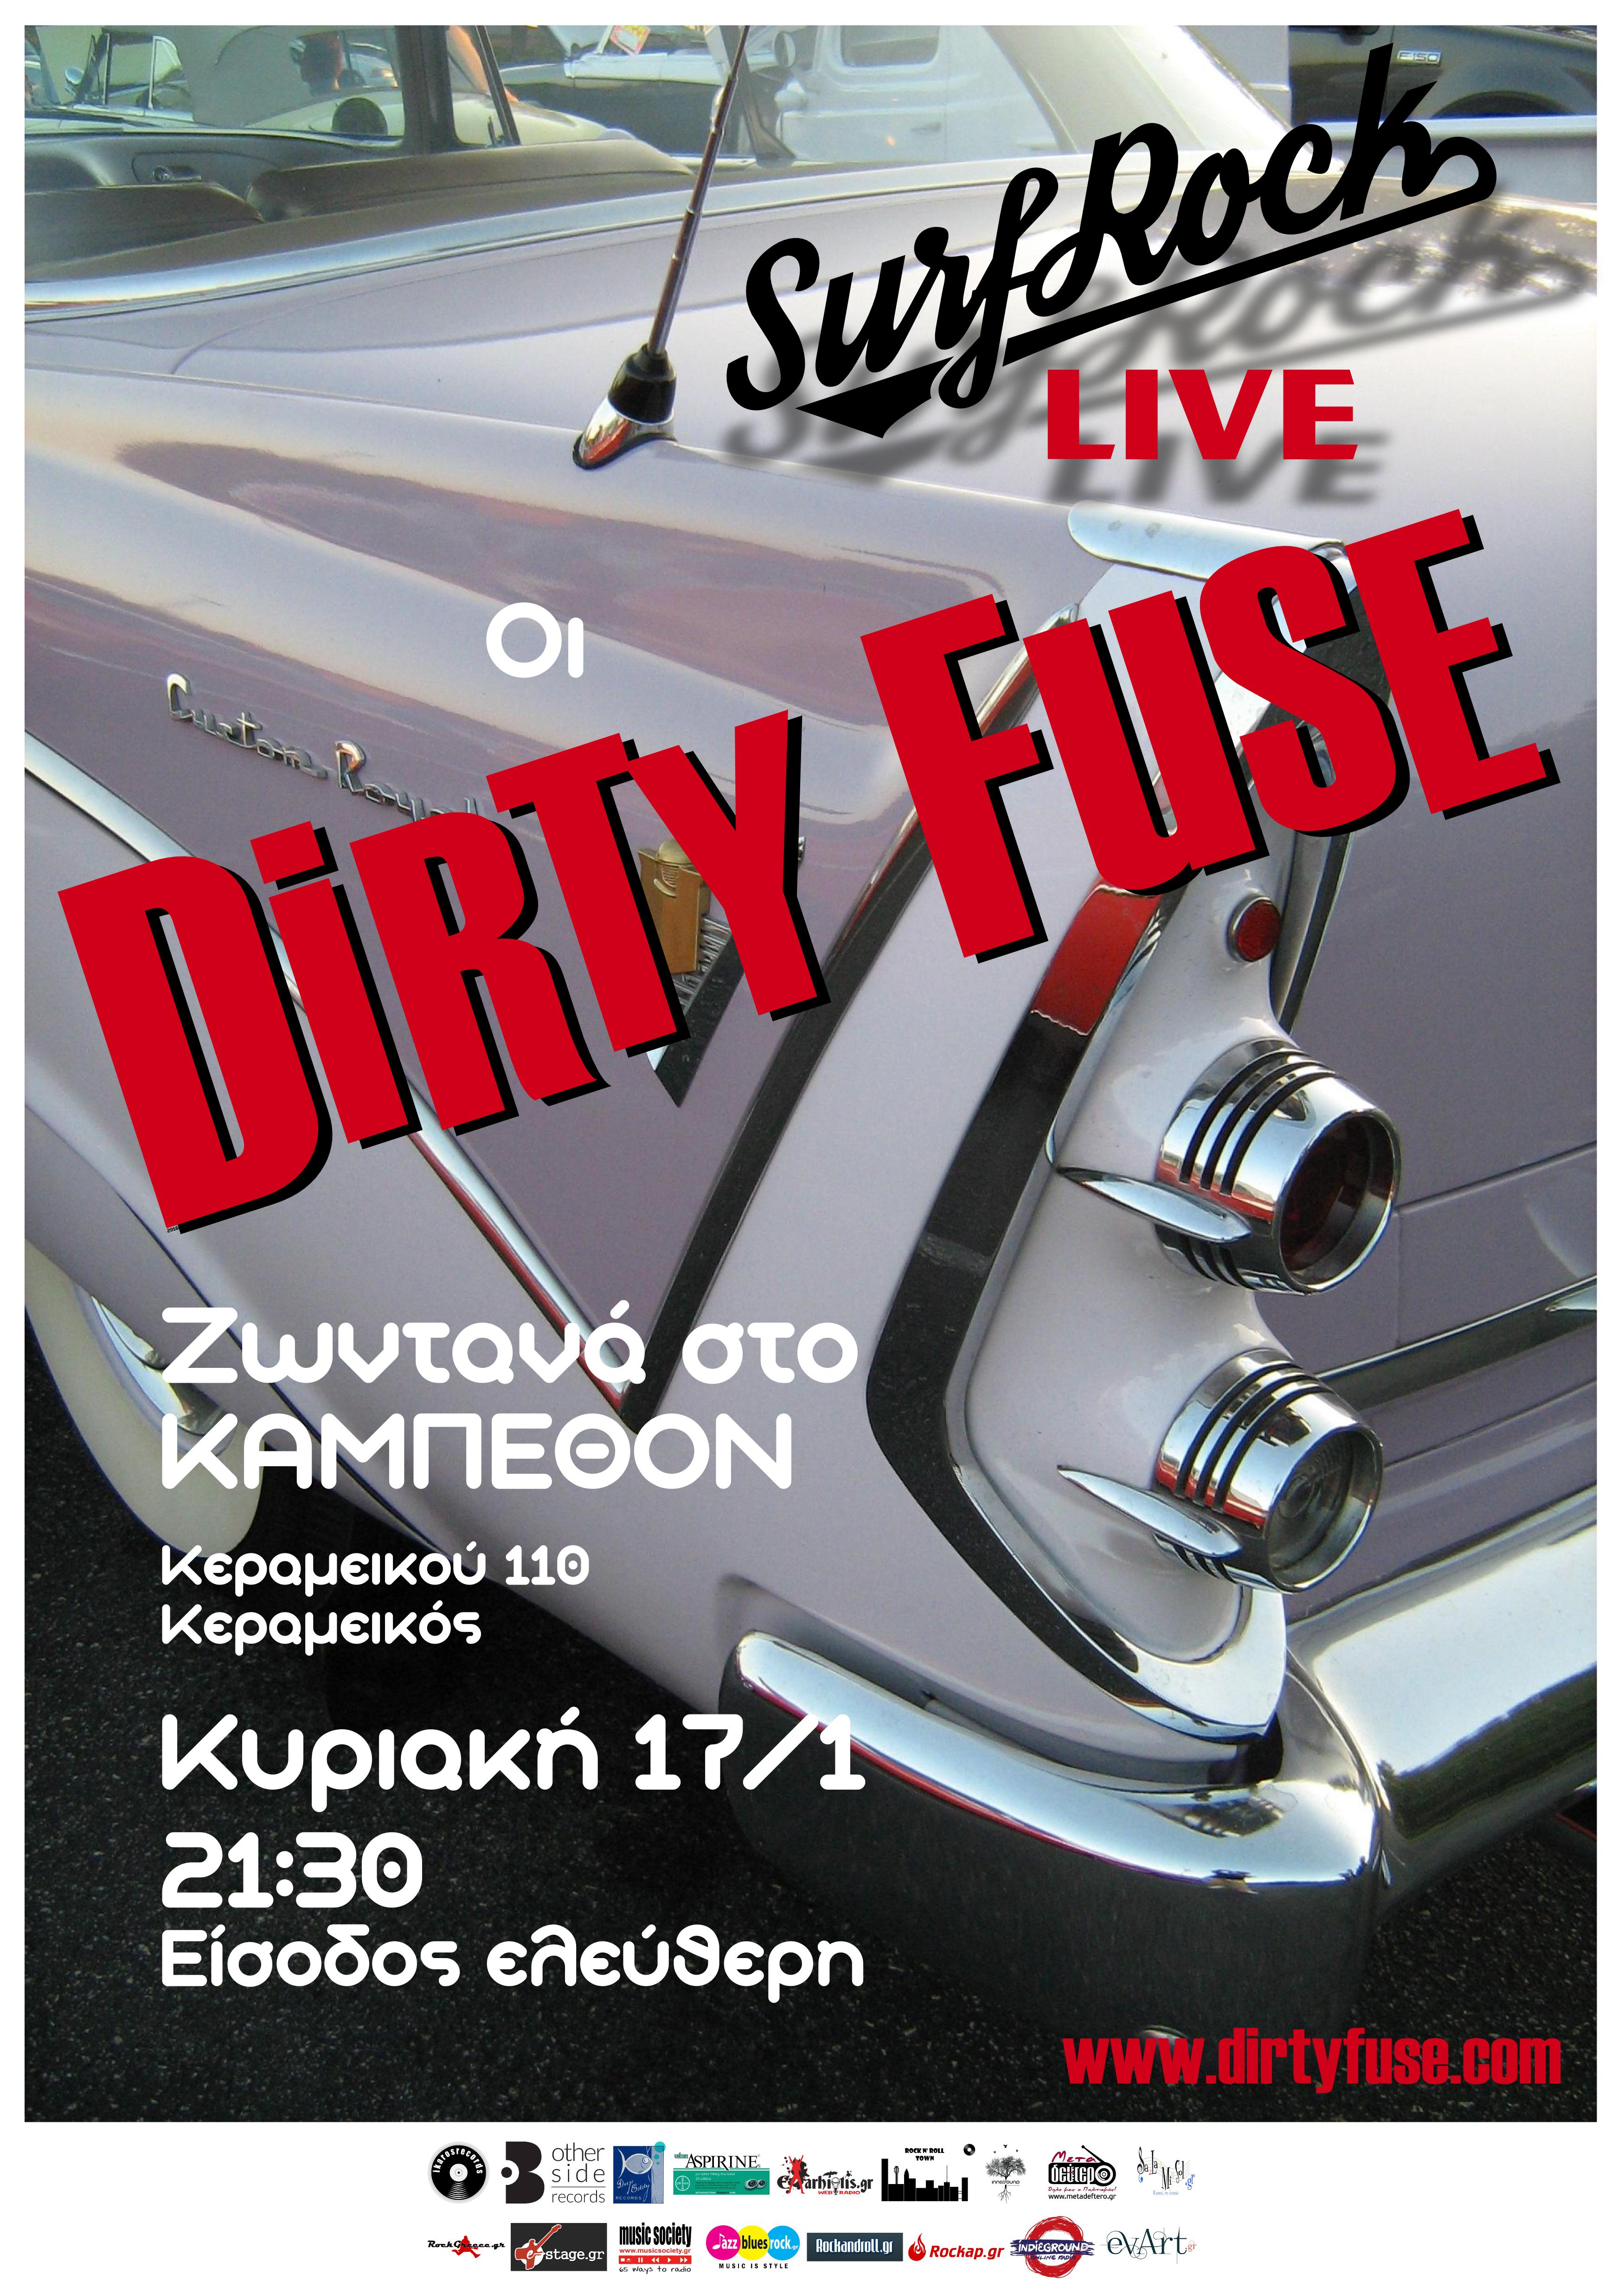 17.01.2016 – Dirty Fuse